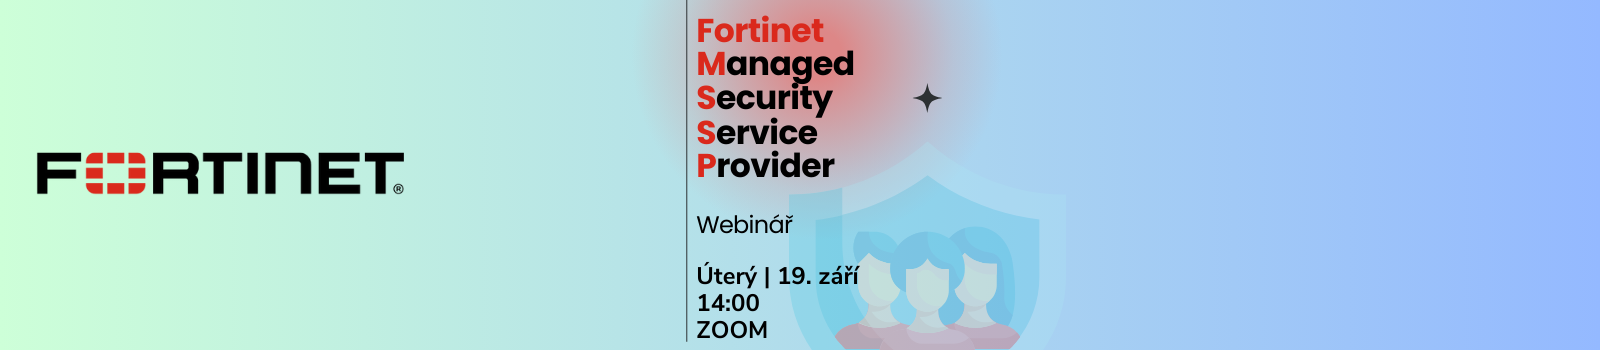 Fortinet Managed Security Service Provider